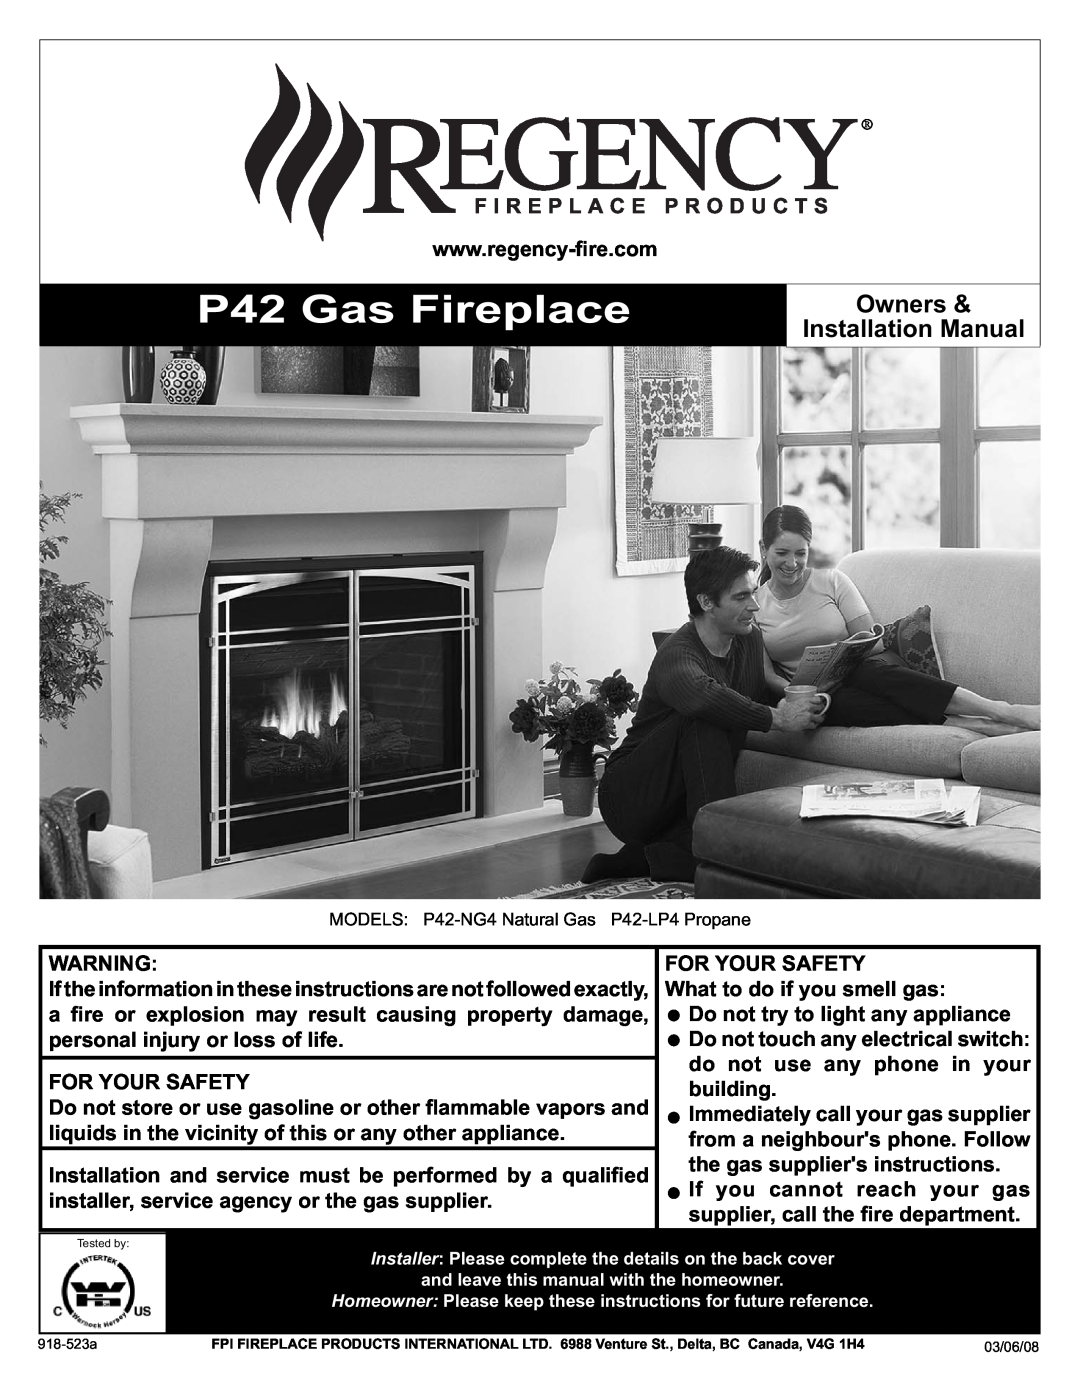 Regency P42-LP4, P42-NG4 installation manual P42 Gas Fireplace, Owners, Installation Manual 